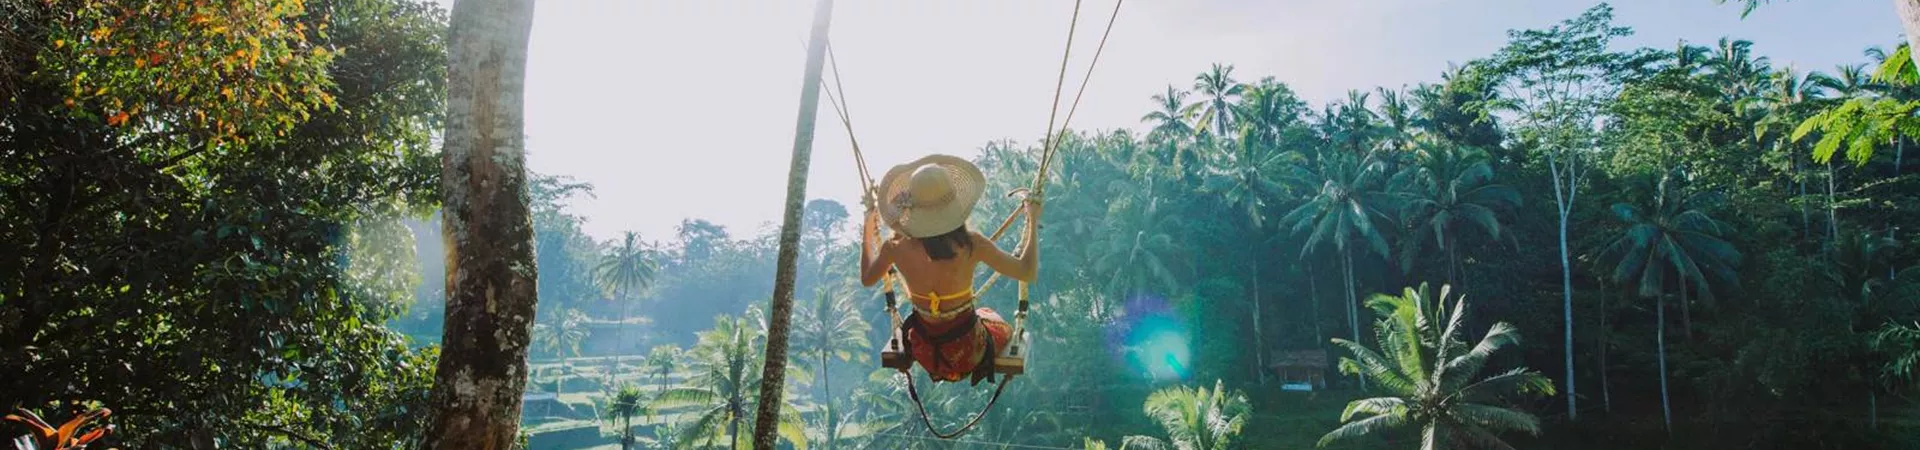 A traveller on a swing